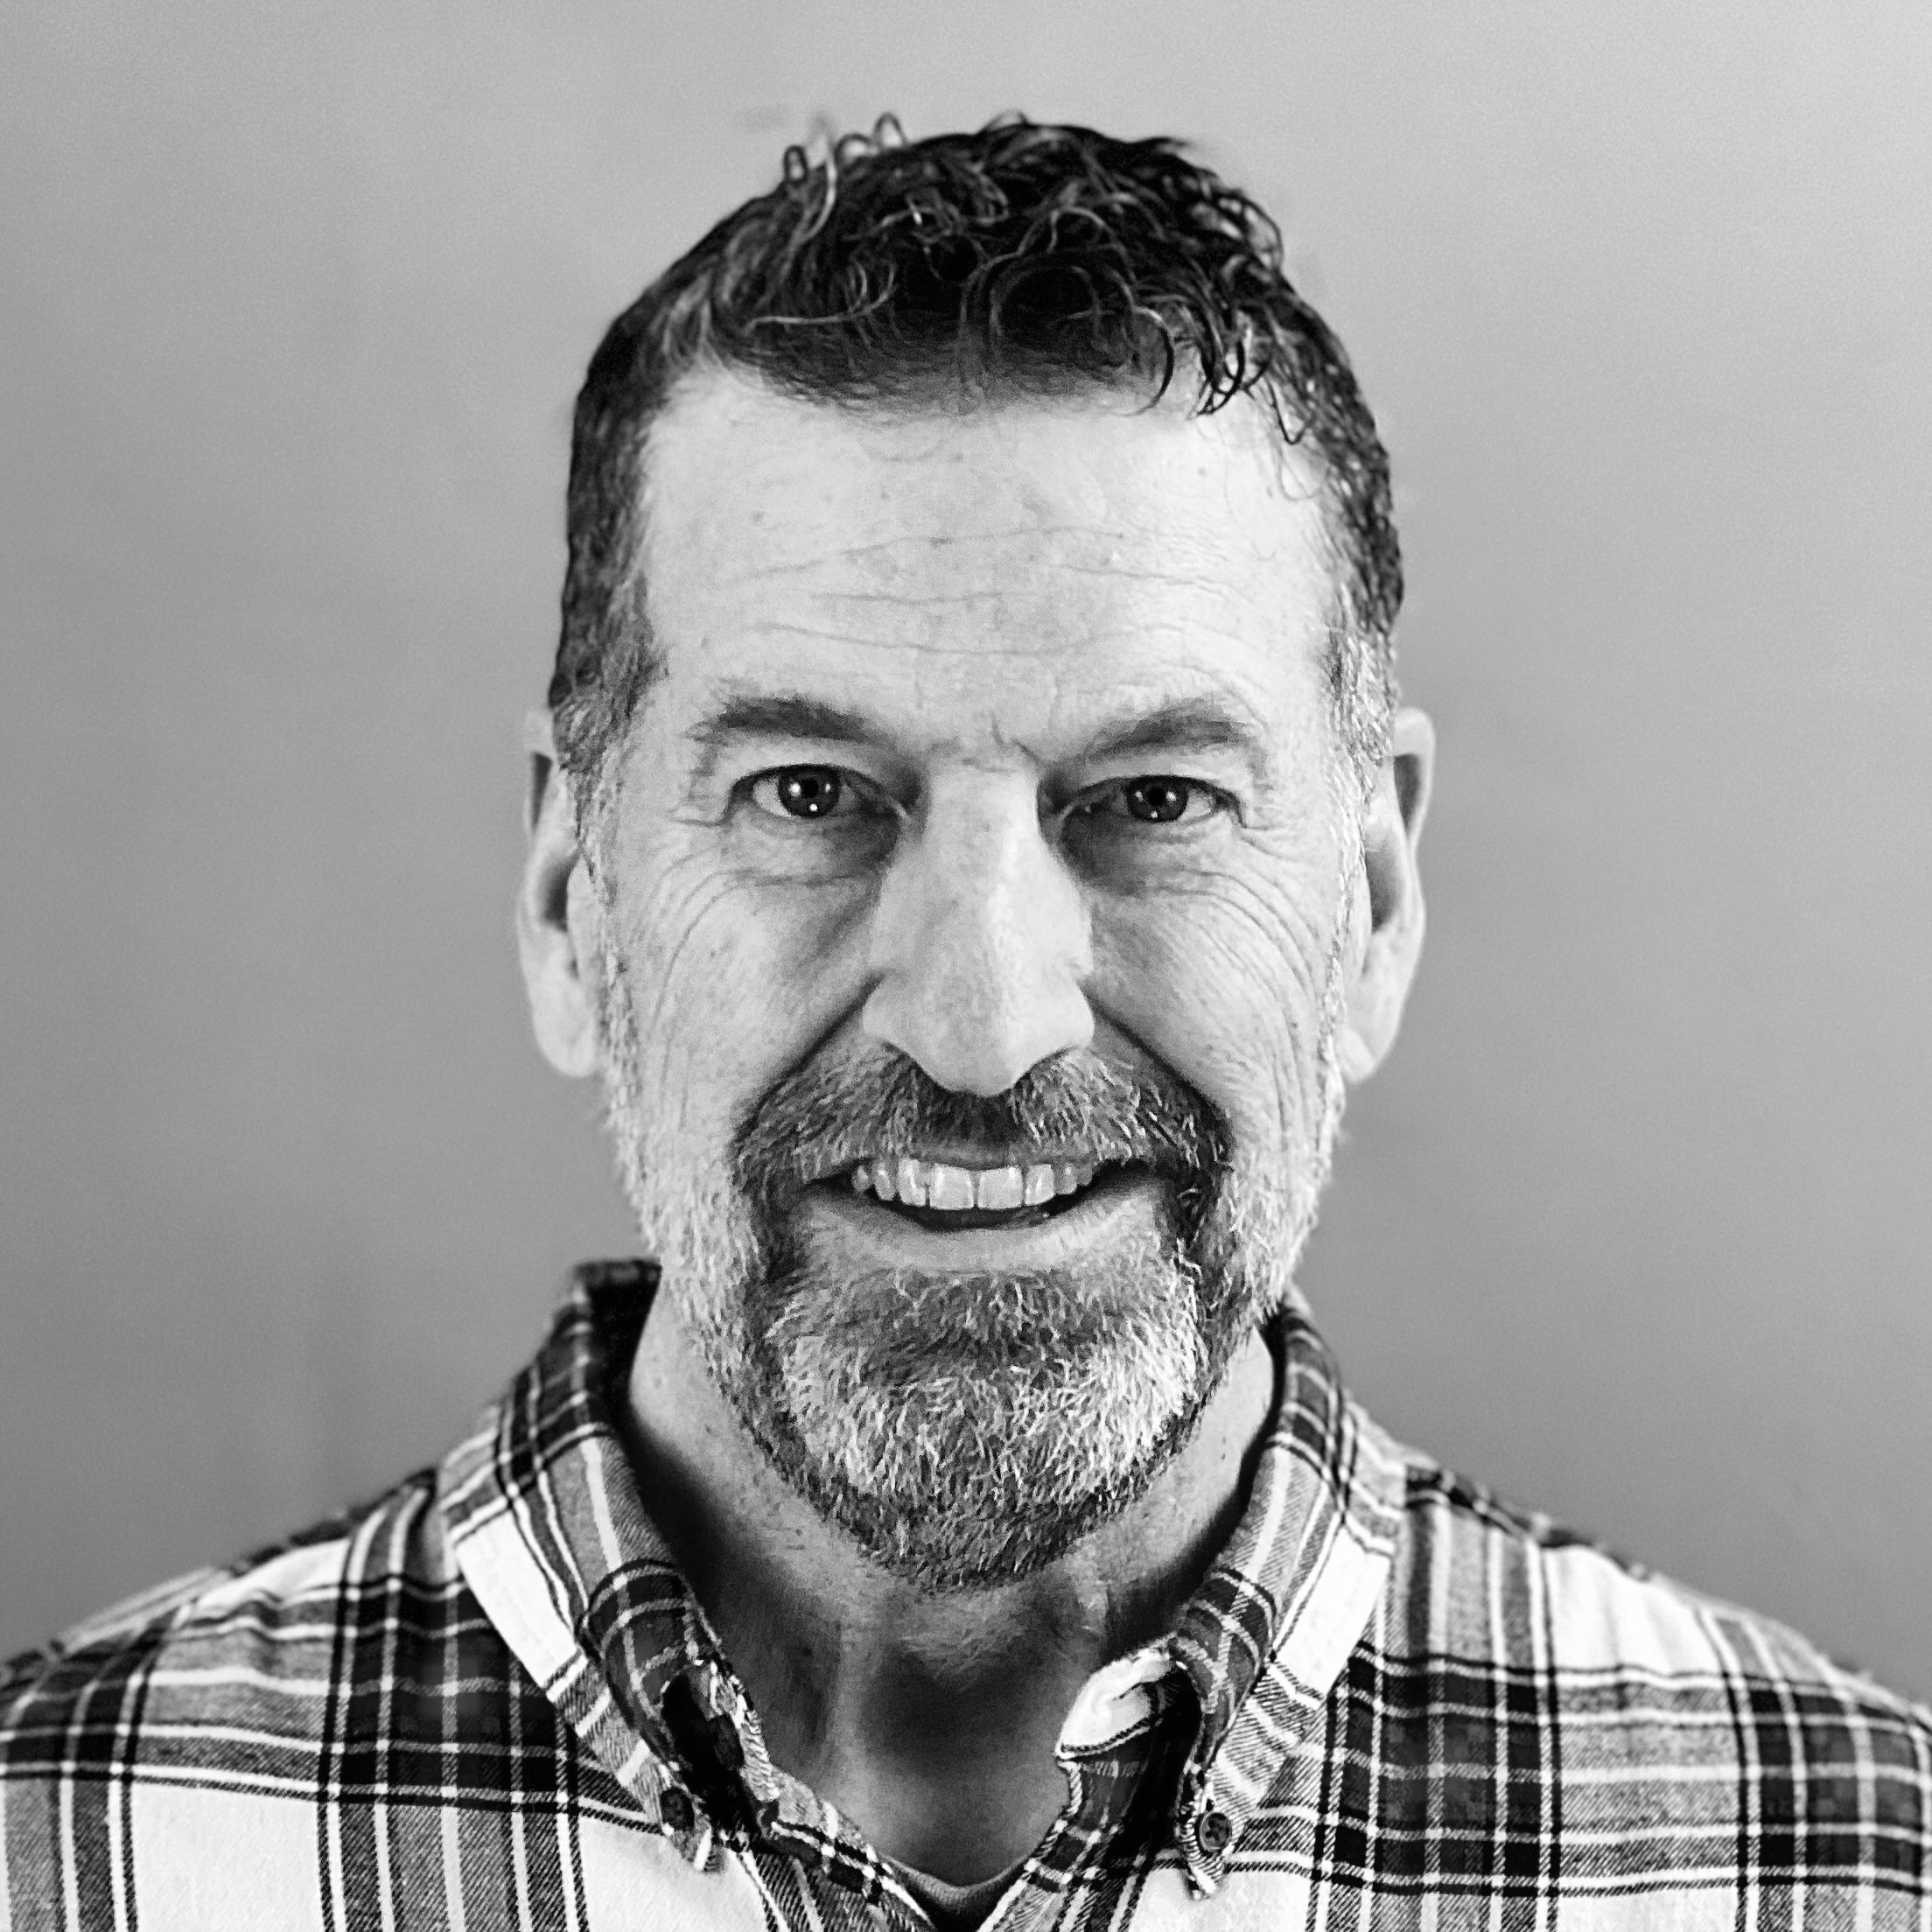 An image of Brian Bluhm smiling in a plaid shirt in a black and white headshot